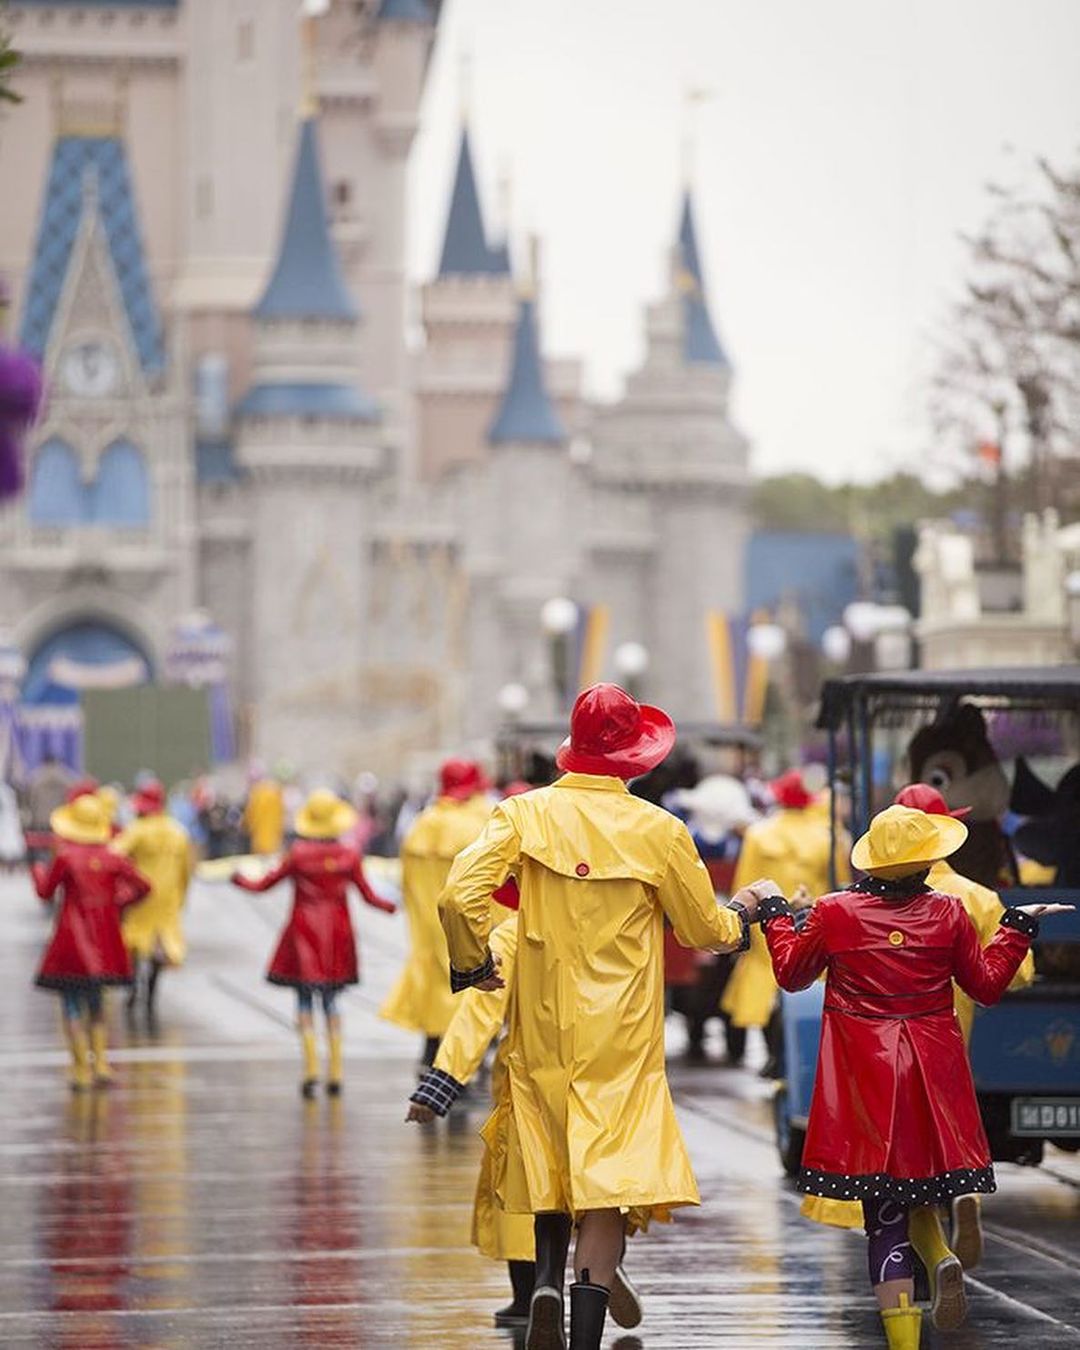 Magic Kingdom with Rain - When is the best time to go to Disney and Orlando